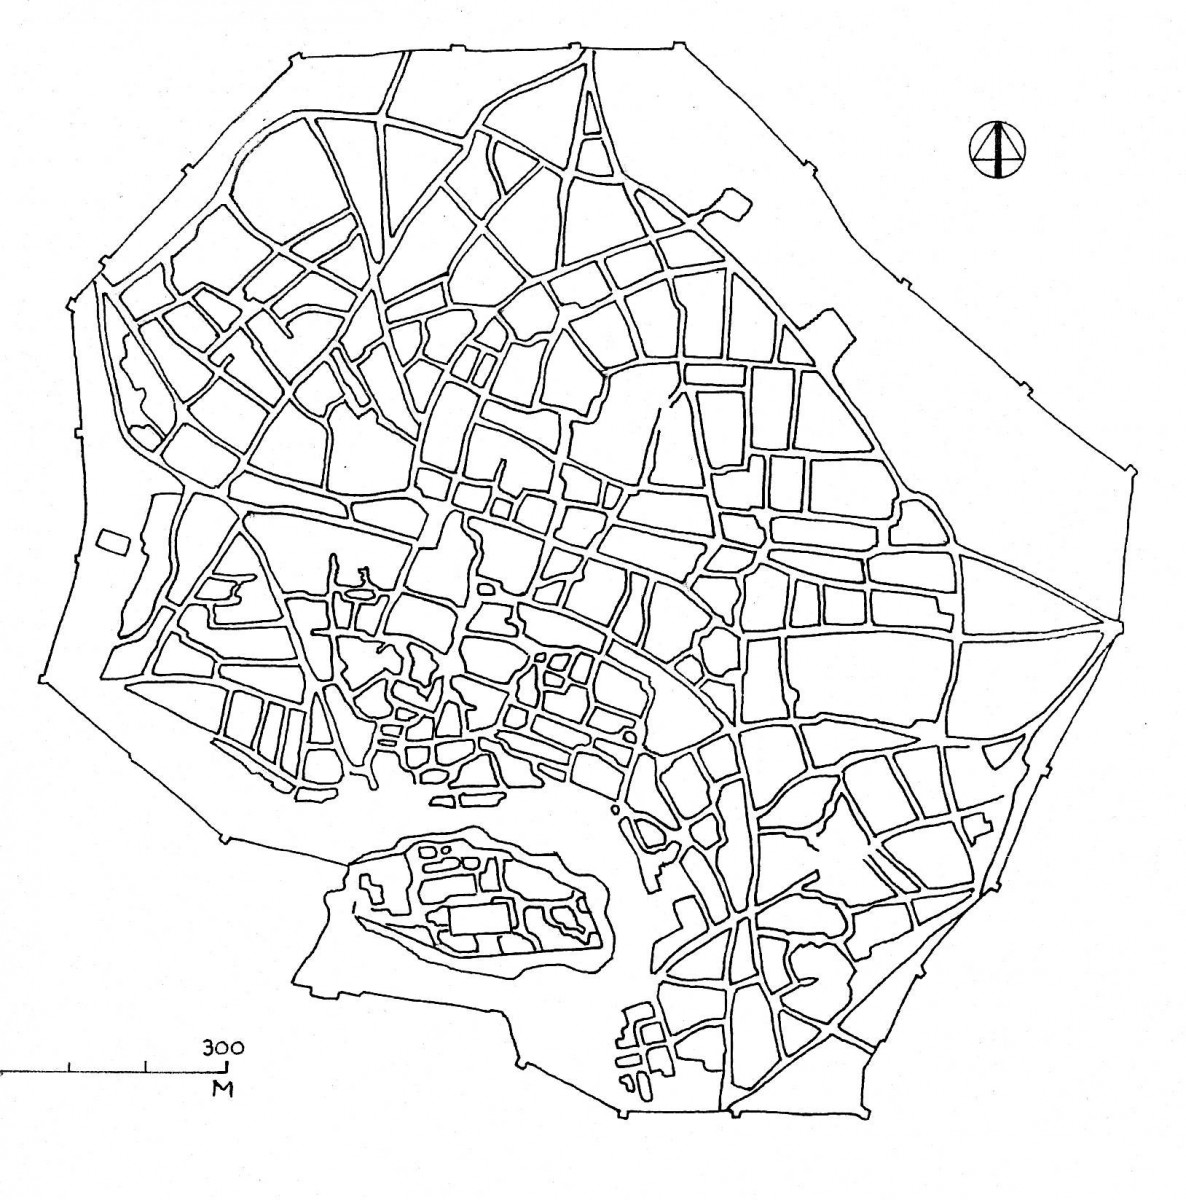 Fig. 1. Athens during the 18th and early 19th century, surrounded by its walls. All the public buildings were concentrated in the densely populated zone directly to the north of the Acropolis (plan by D. Roubien according to various historical sources).